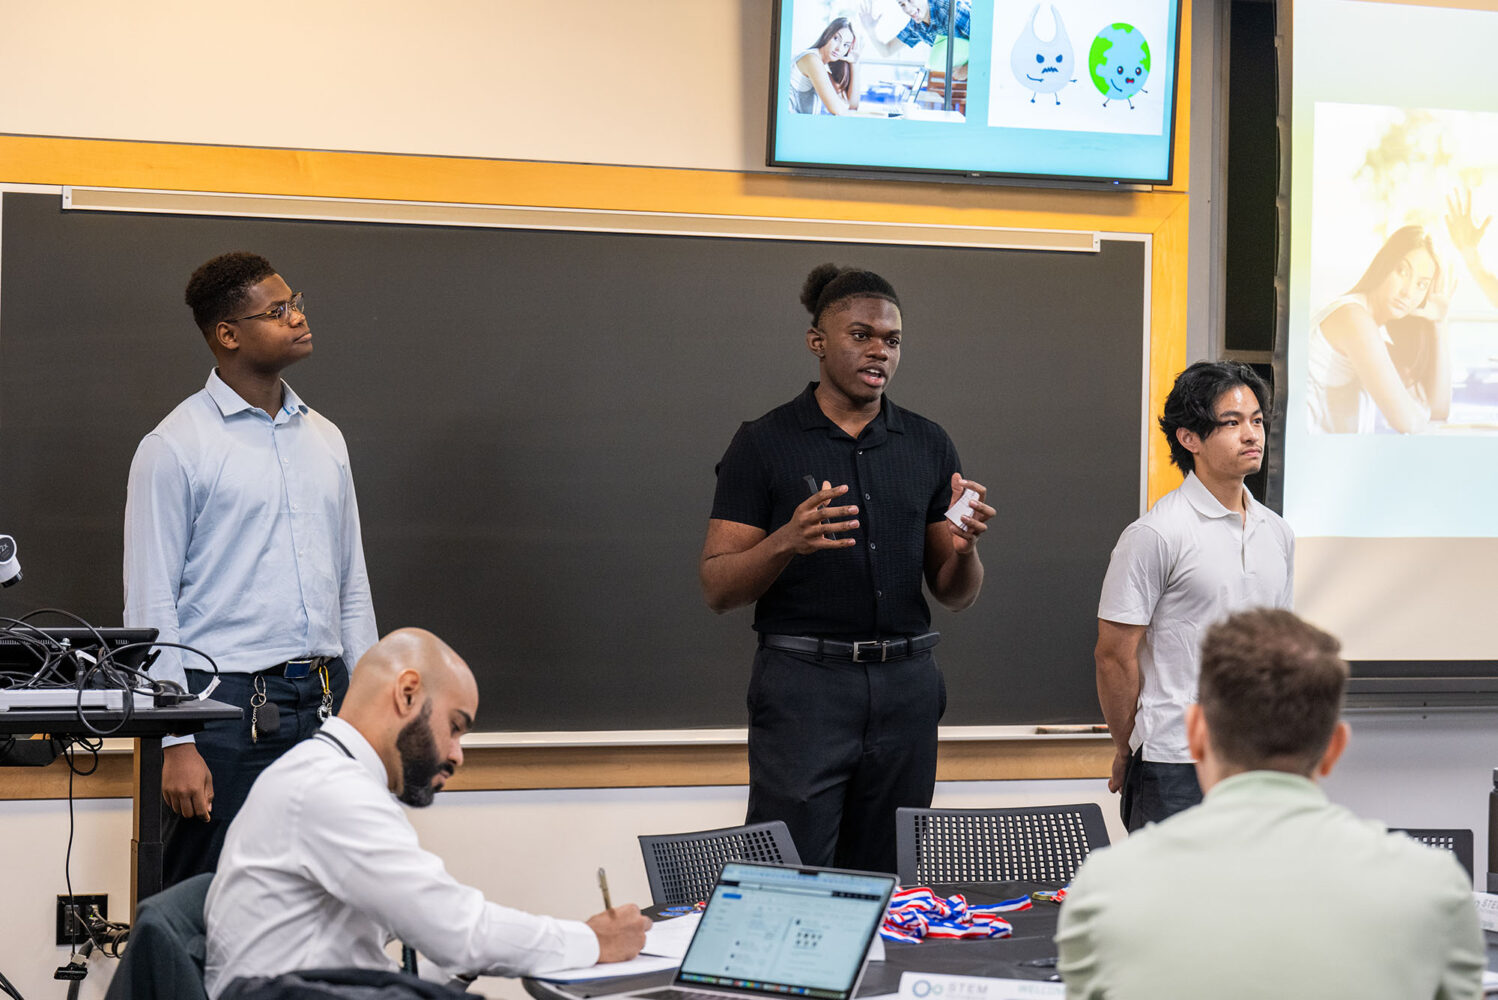 Photo: Three young men stand at the front of a classroom presenting their pitches. On the left, a Black man with a flat top fade wears a blue button up and navy slacks. In the middle, a Black man with his hair pulled into a puff wears a black button up with black slacks. And on the right, a young Asian man with long hair wears a gray polo and slacks.